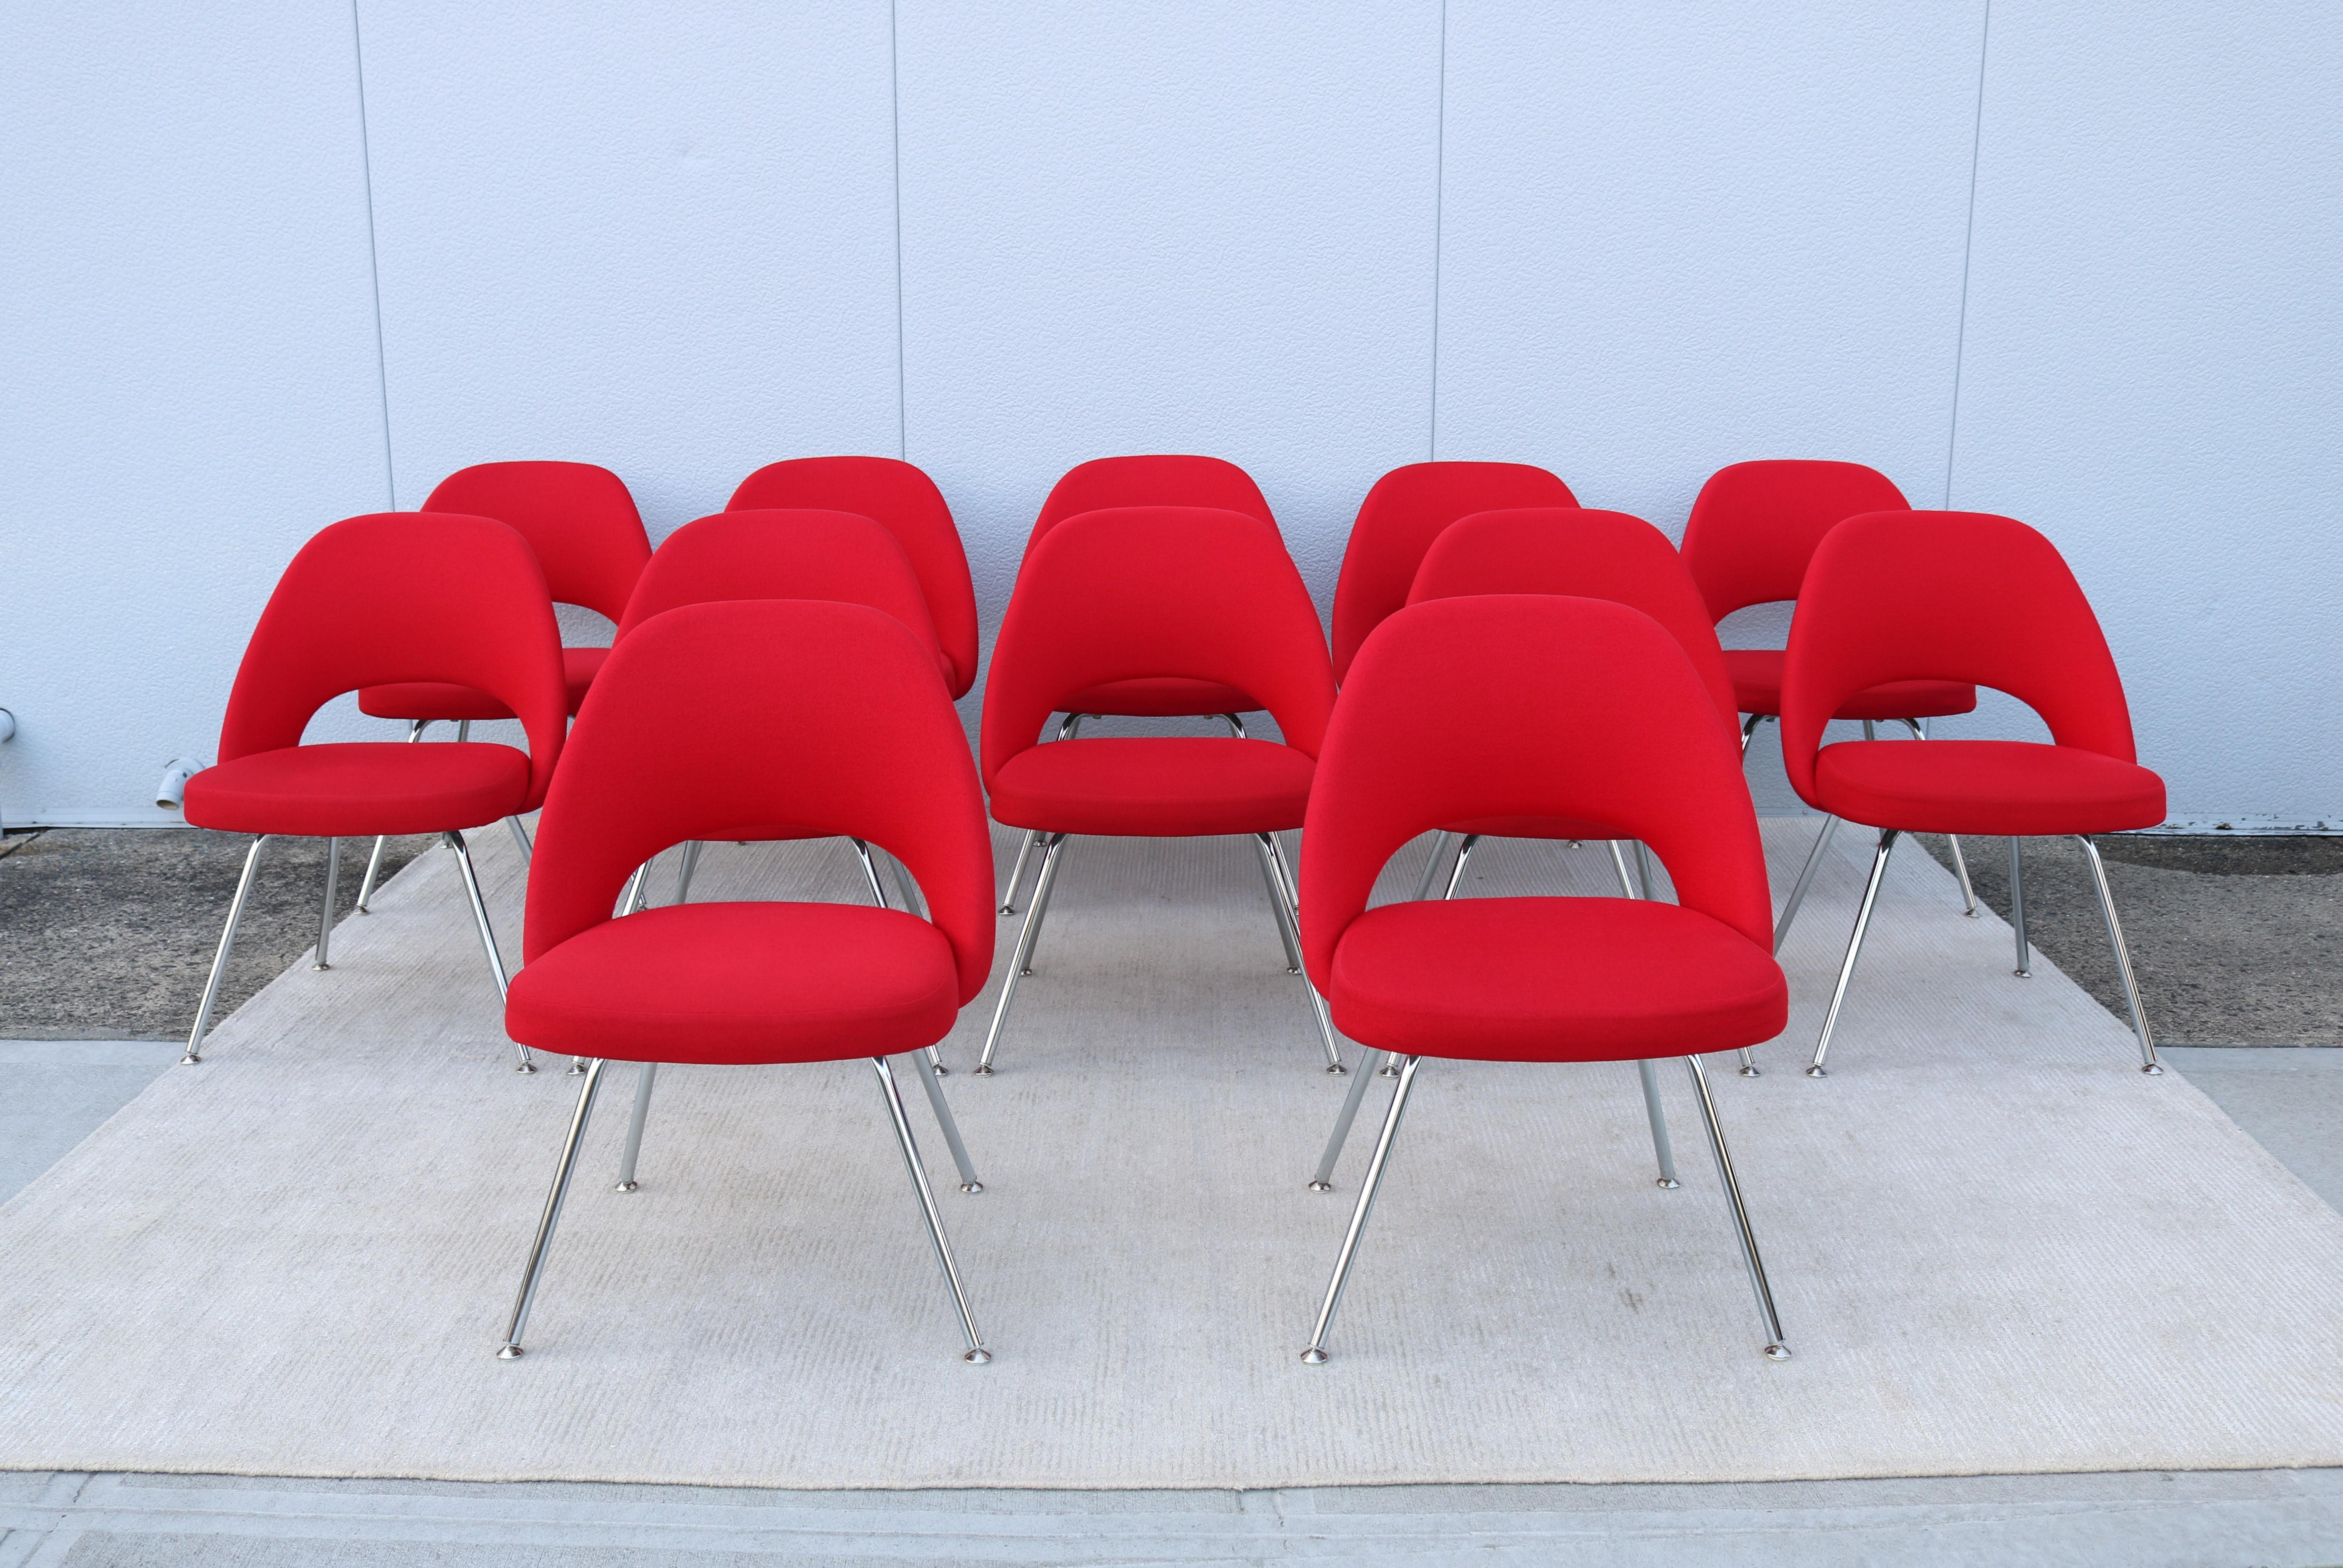 Stunning authentic mid-century modern set of twelve Saarinen executive armless chairs by Knoll.
One of Knoll's most popular designs that achieved supreme comfort through the shape of its shell.
It was introduced in 1950 a midcentury modern classic